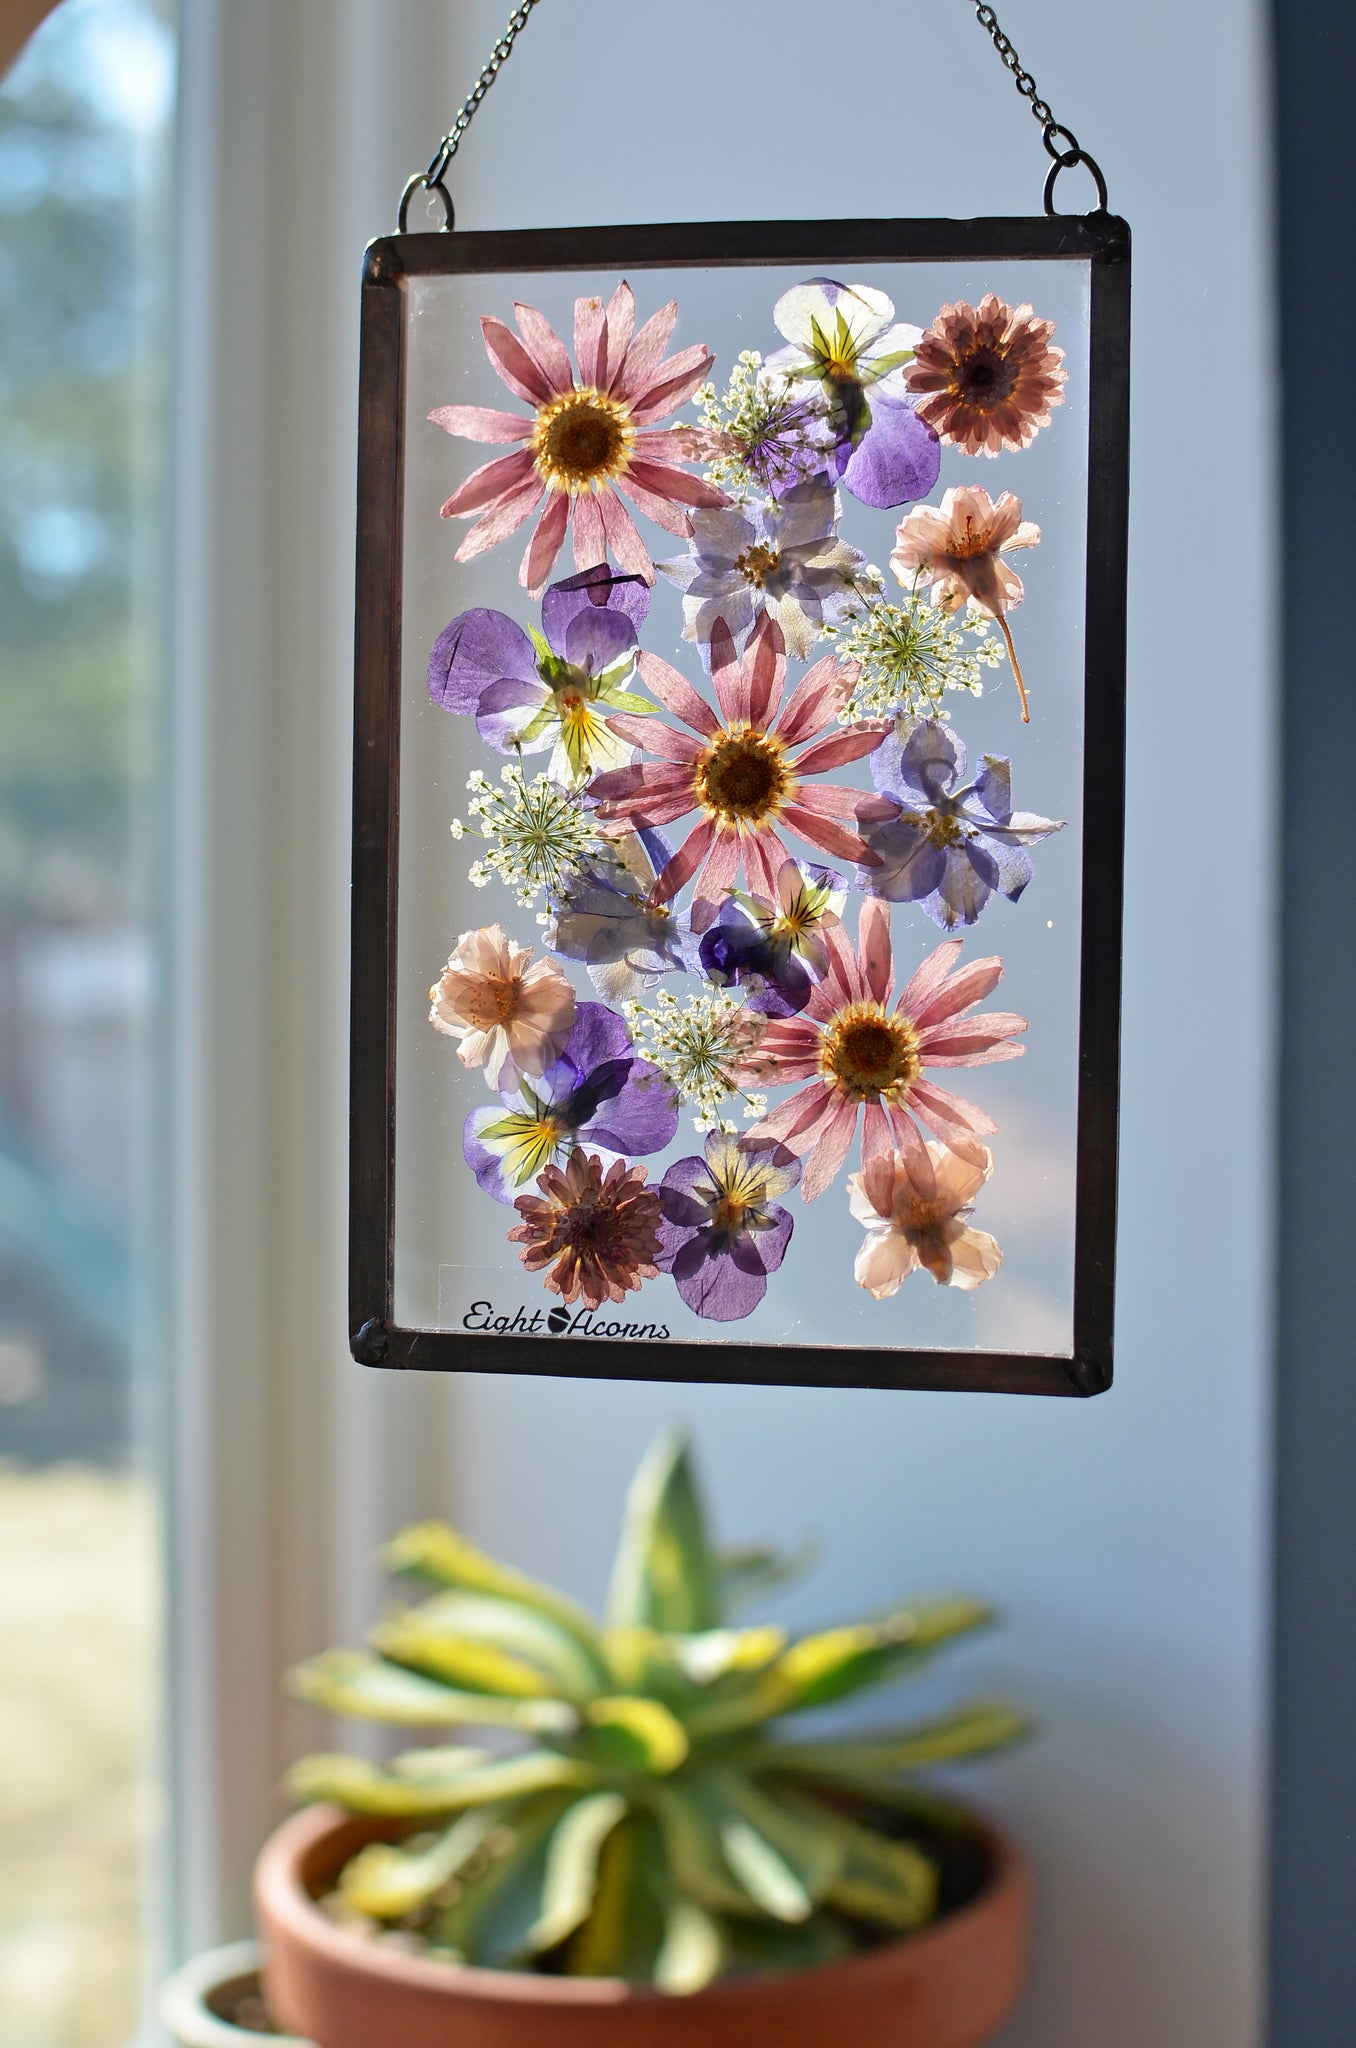 Pressed Flowers in Floating Frames – The Artful Roost